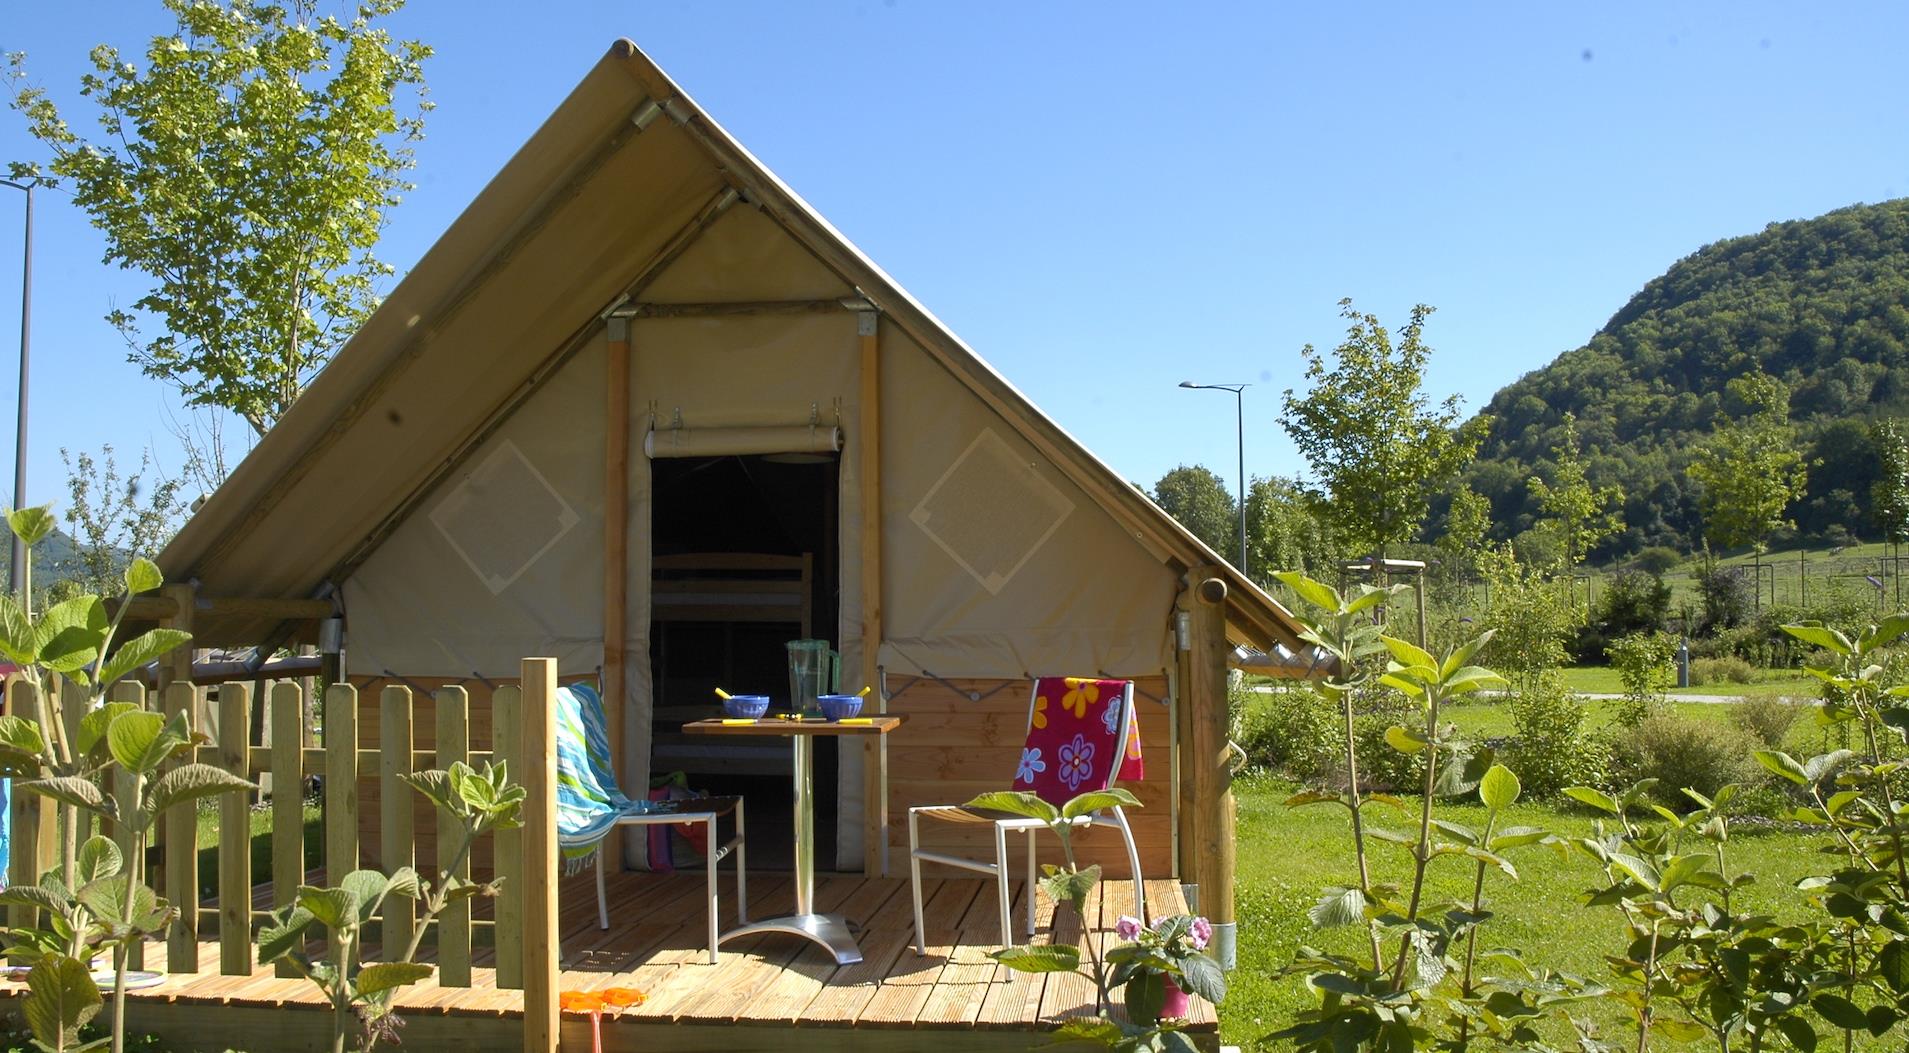 Accommodation - Lodge Canadienne For Handicapped People, The Tent Comfort For 2, Accessible To The Wheel Chairs - Camping Ecologique LA ROCHE D'ULLY